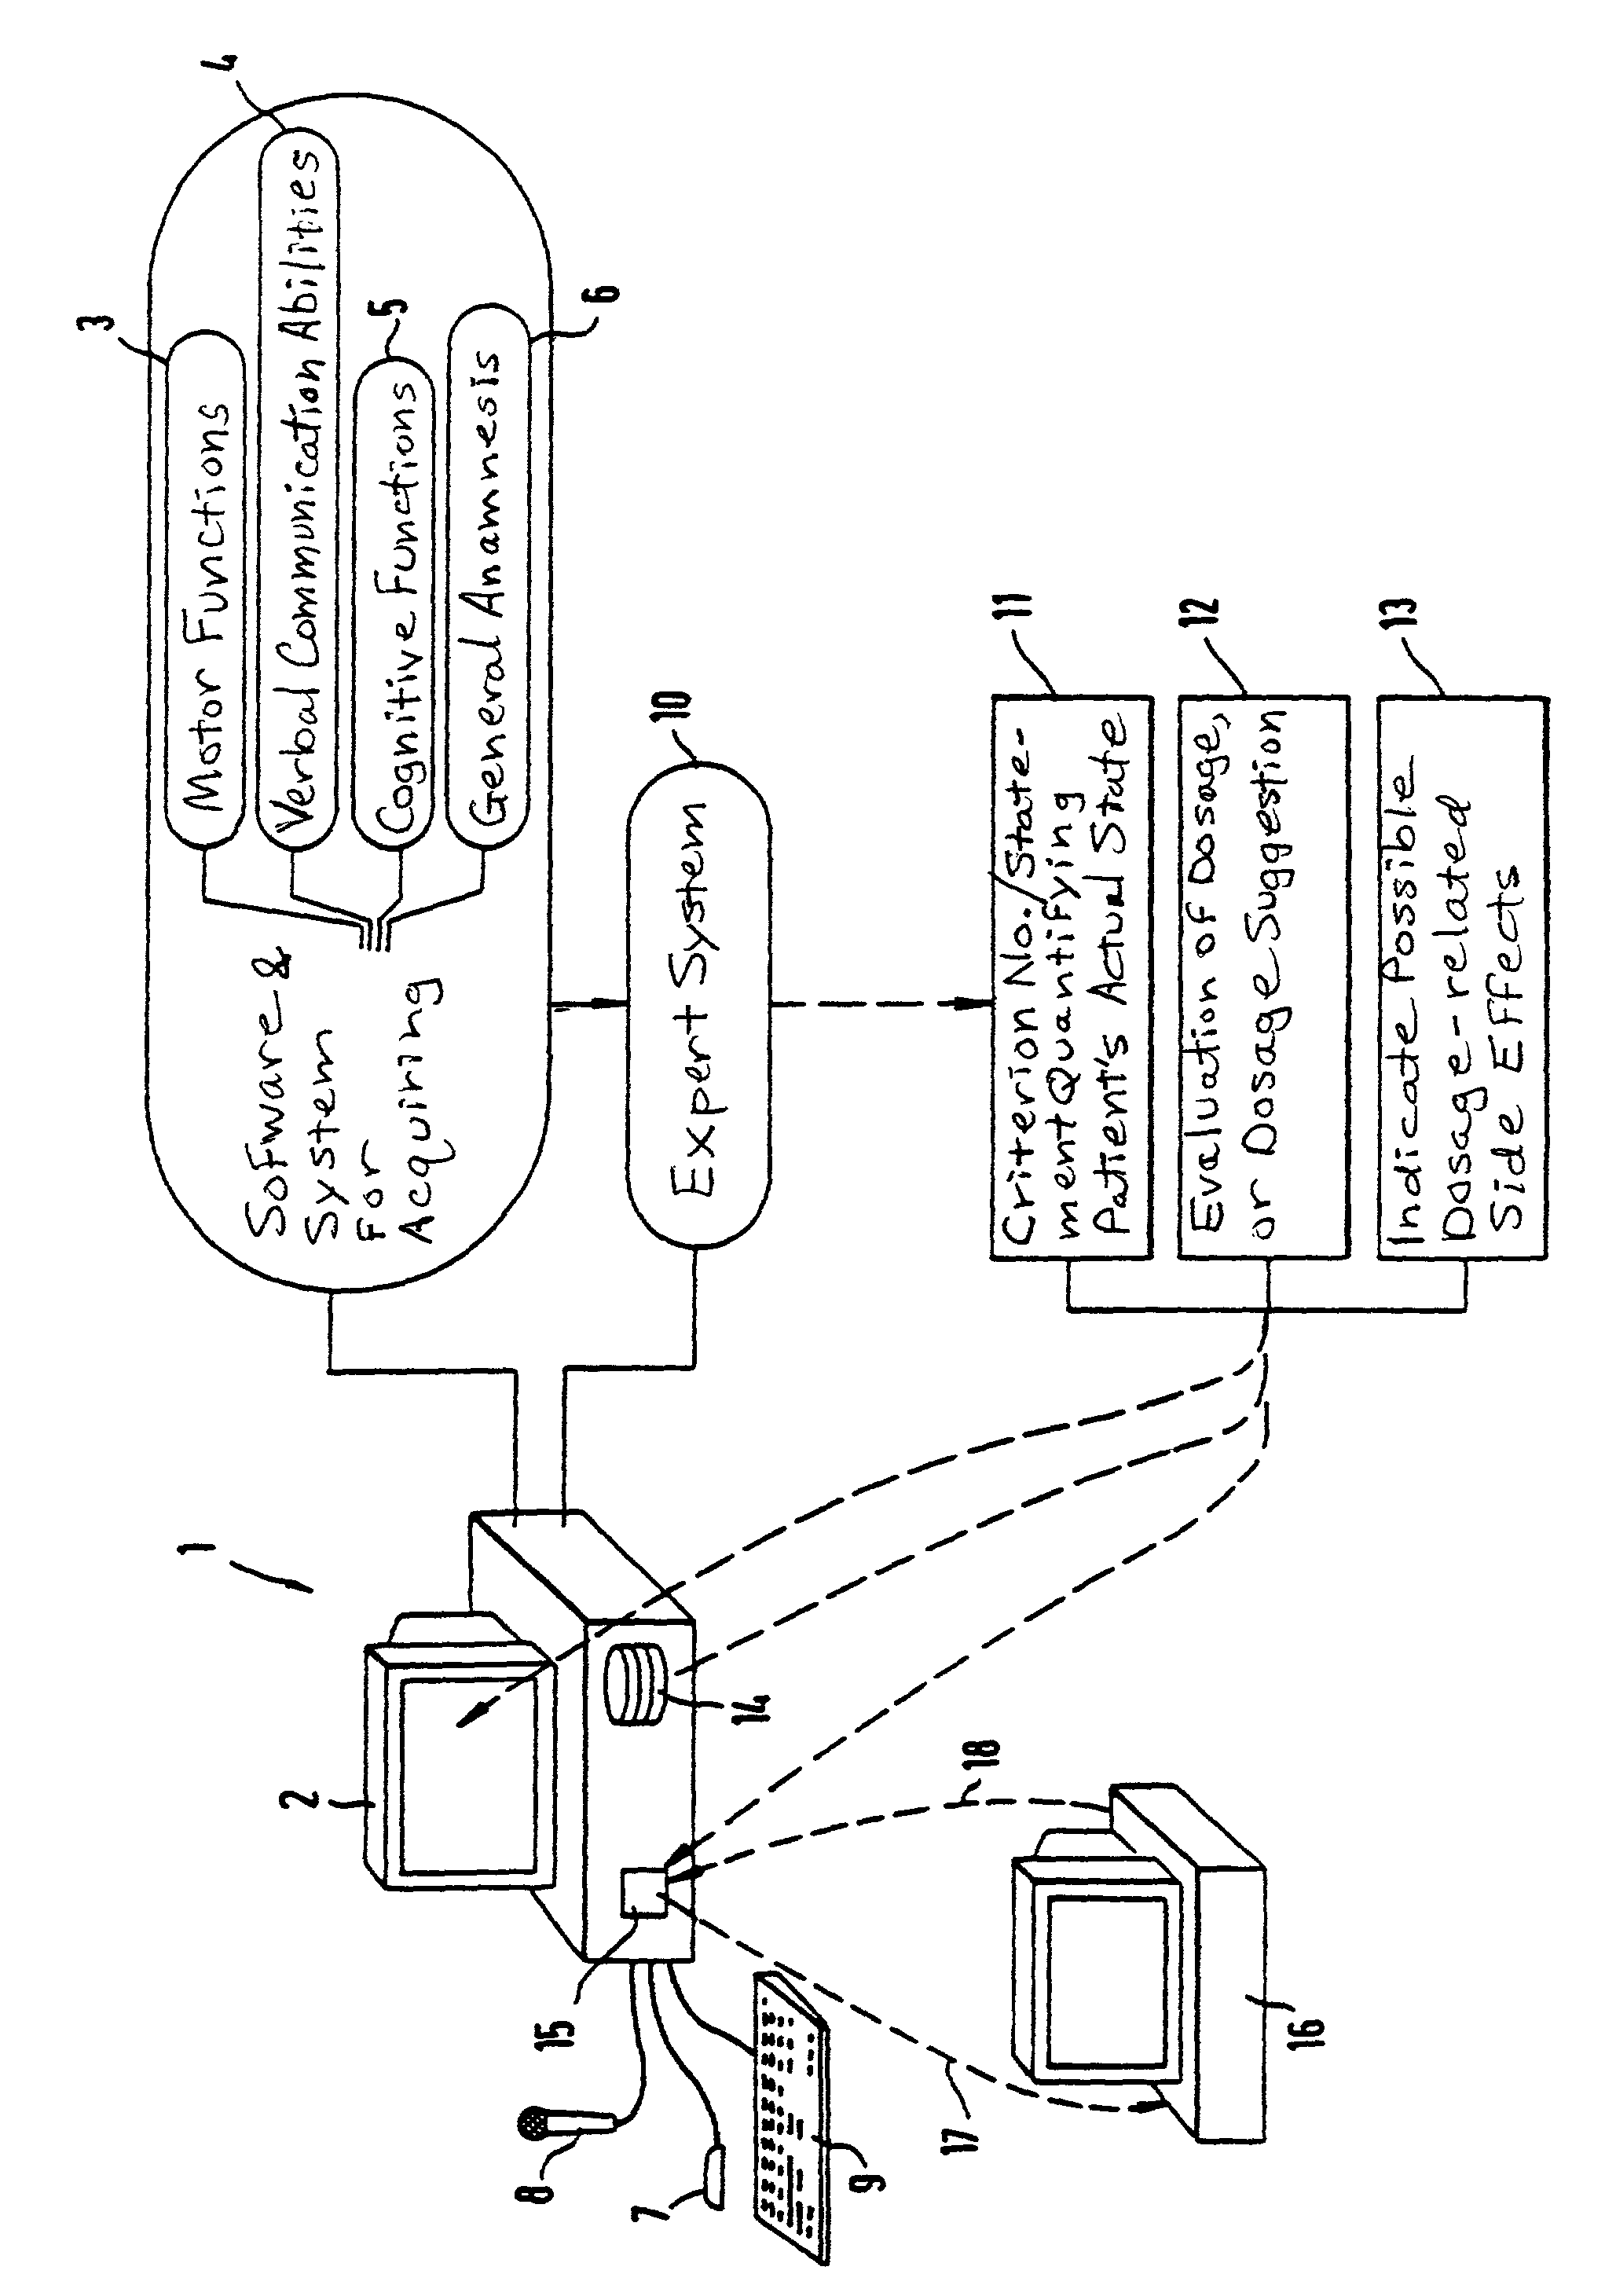 Method and system for allowing a neurologically diseased patient to self-monitor the patient's actual state